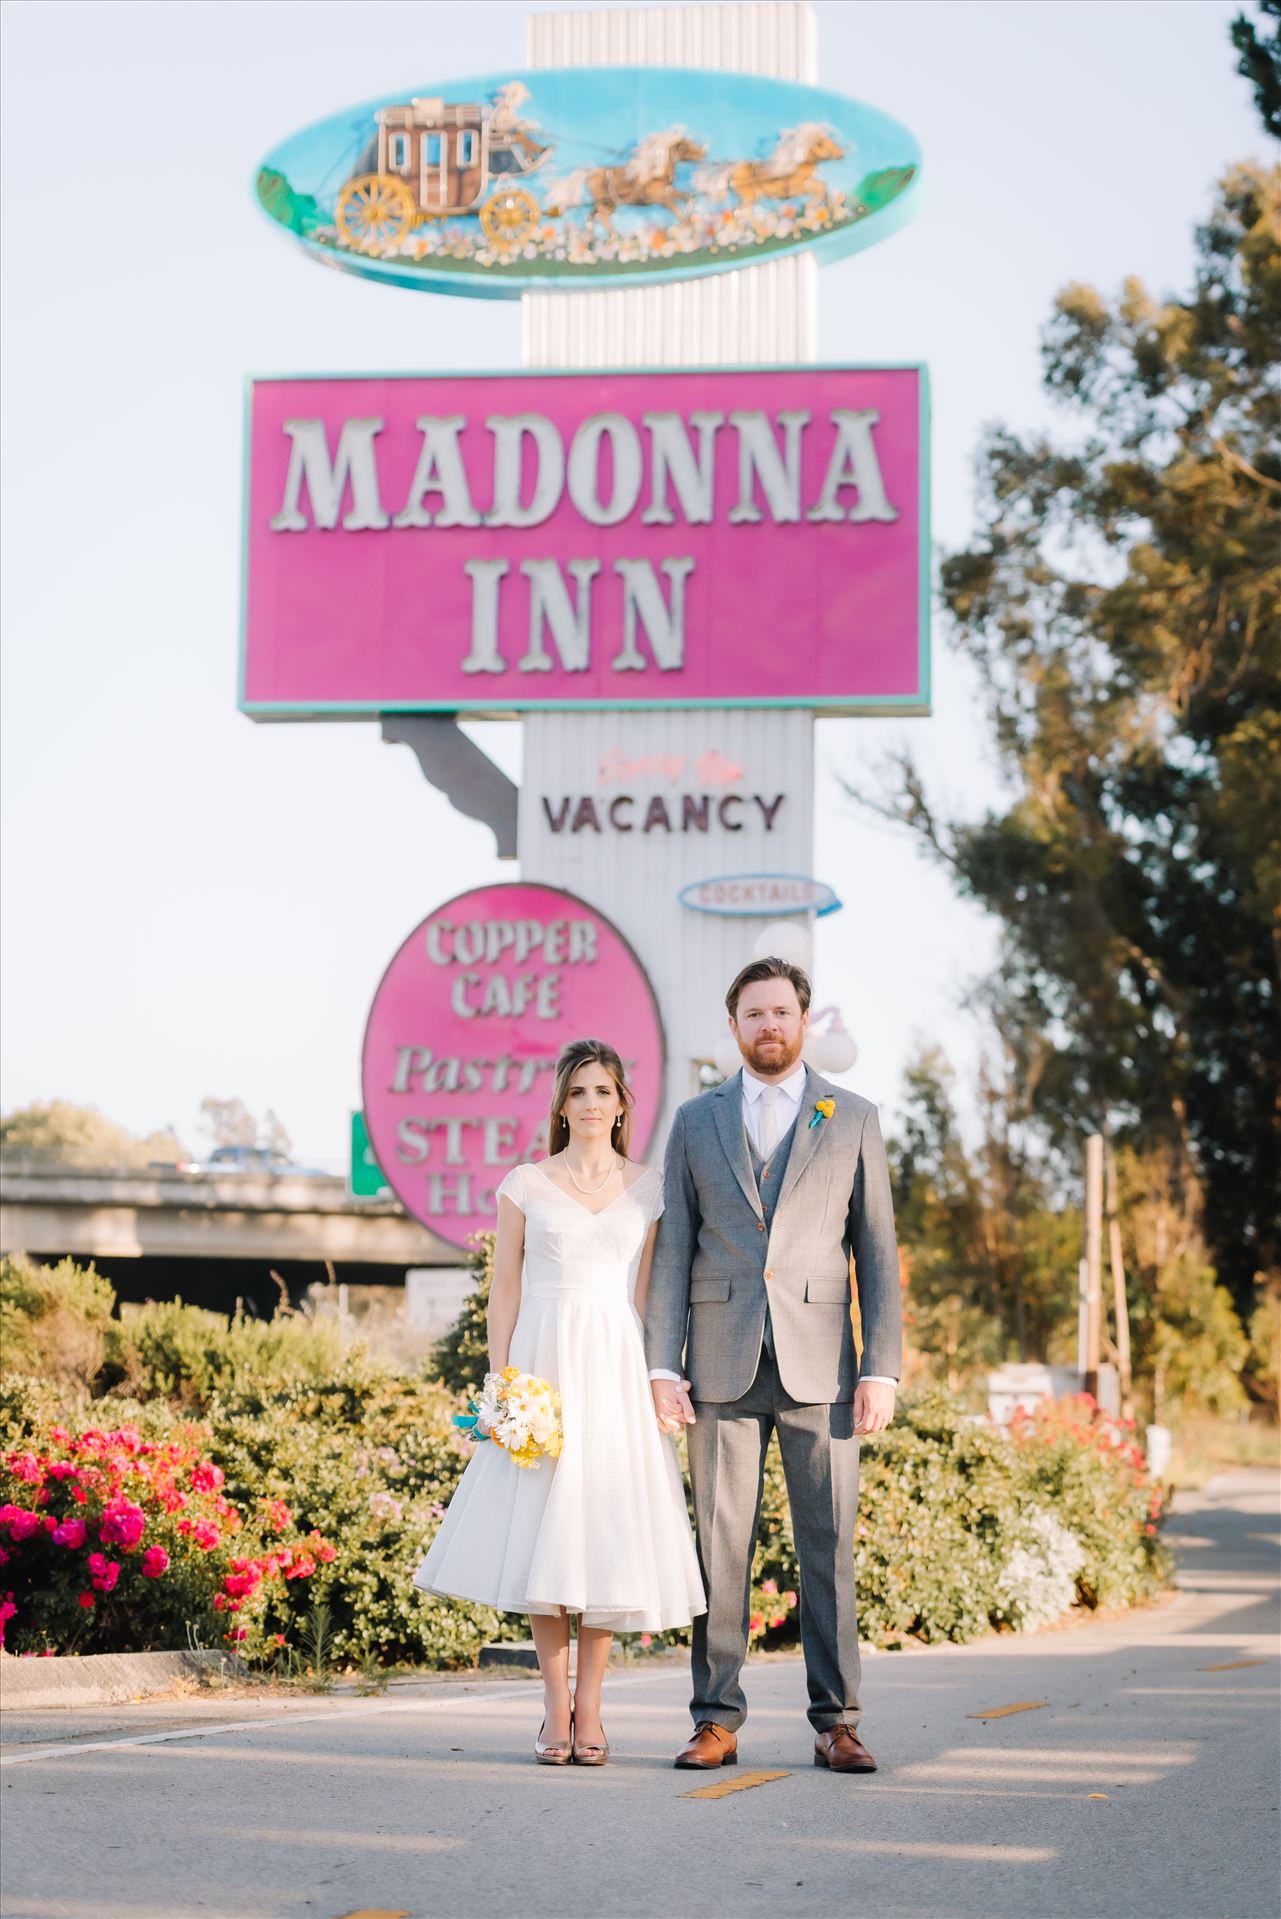 DSC_4274.JPG Mirror's Edge Photography captures Sarah and David's magical Madonna Inn Wedding in San Luis Obispo, California. Bride and Groom vintage vibe in front of Madonna Inn Sign. by Sarah Williams